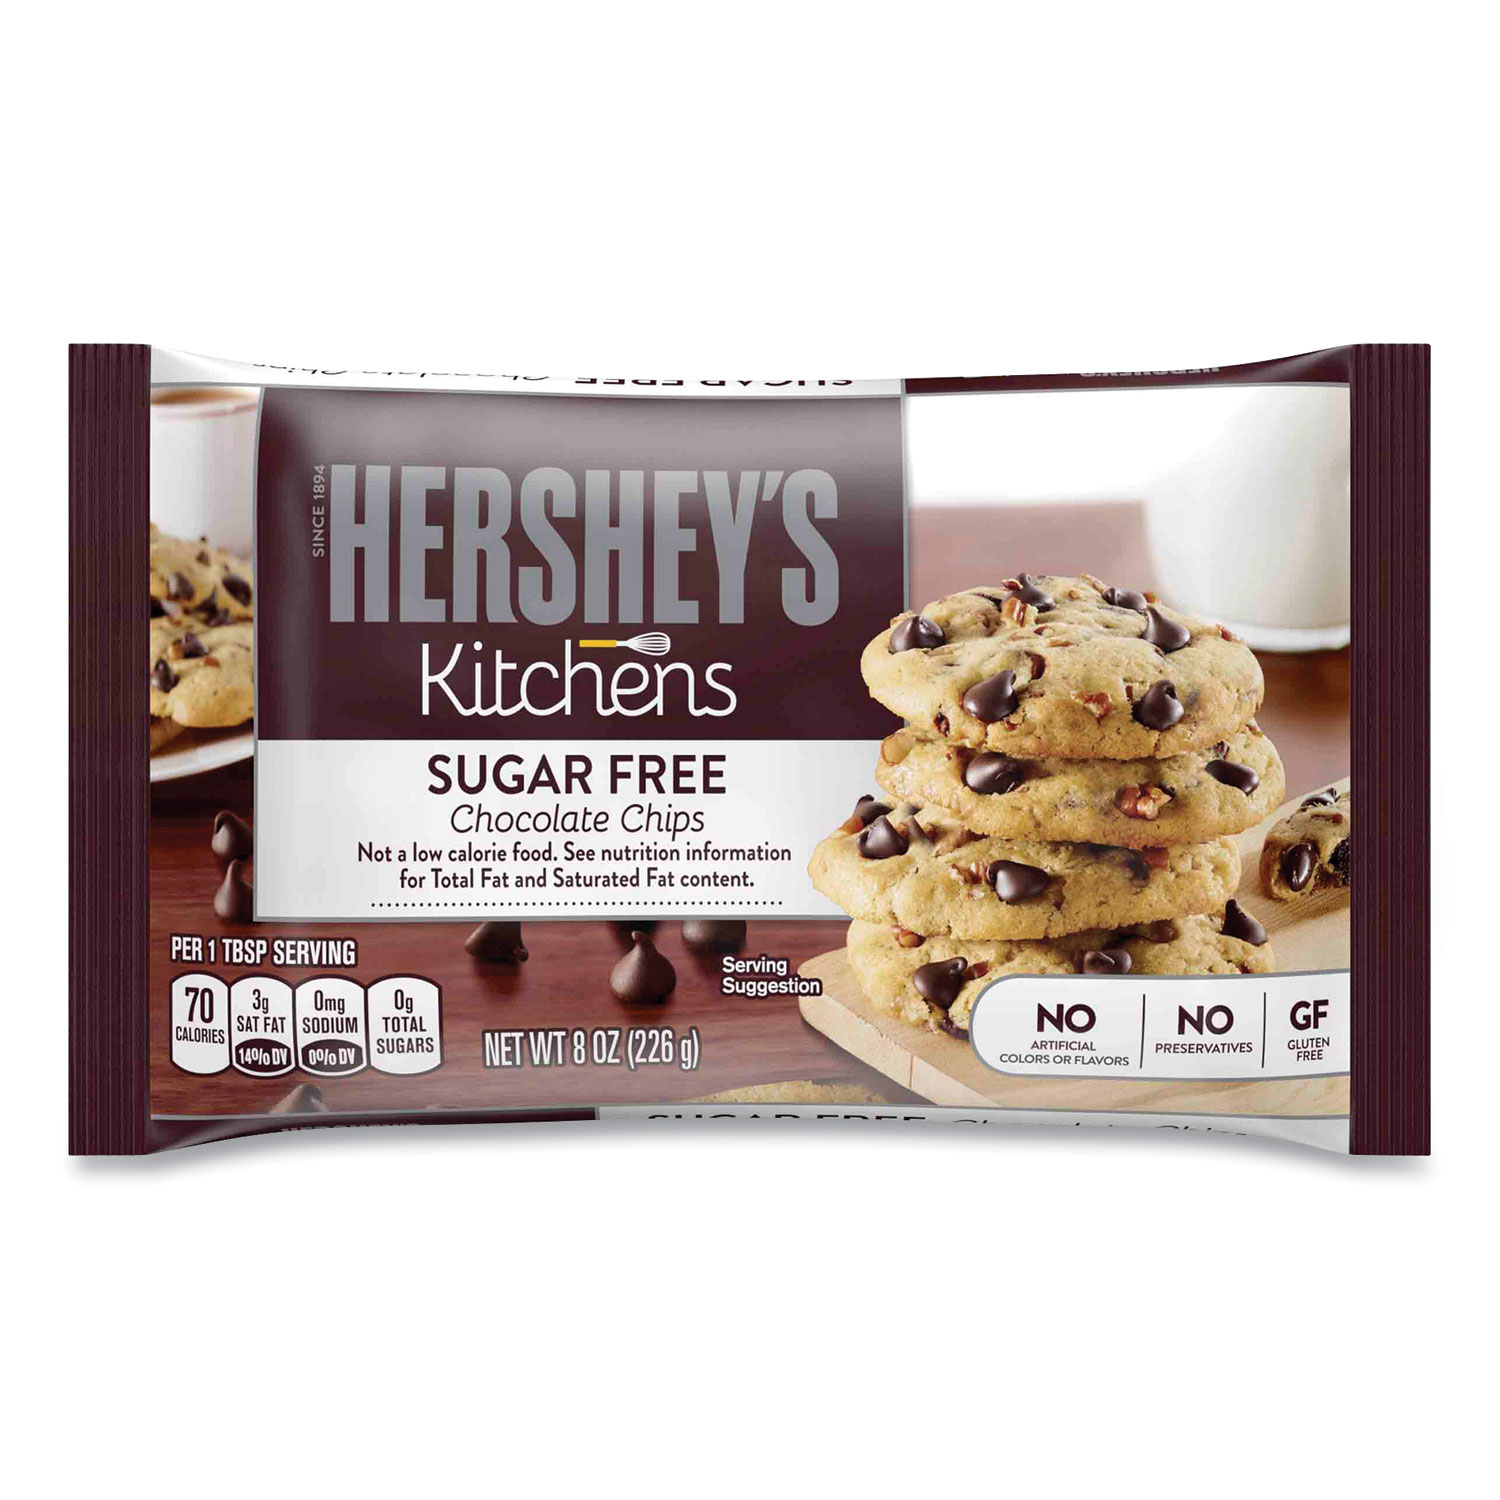  Hershey's 14134 Sugar Free Chocolate Chips, 8 oz Bag, 2/Pack, Free Delivery in 1-4 Business Days (GRR24600350) 